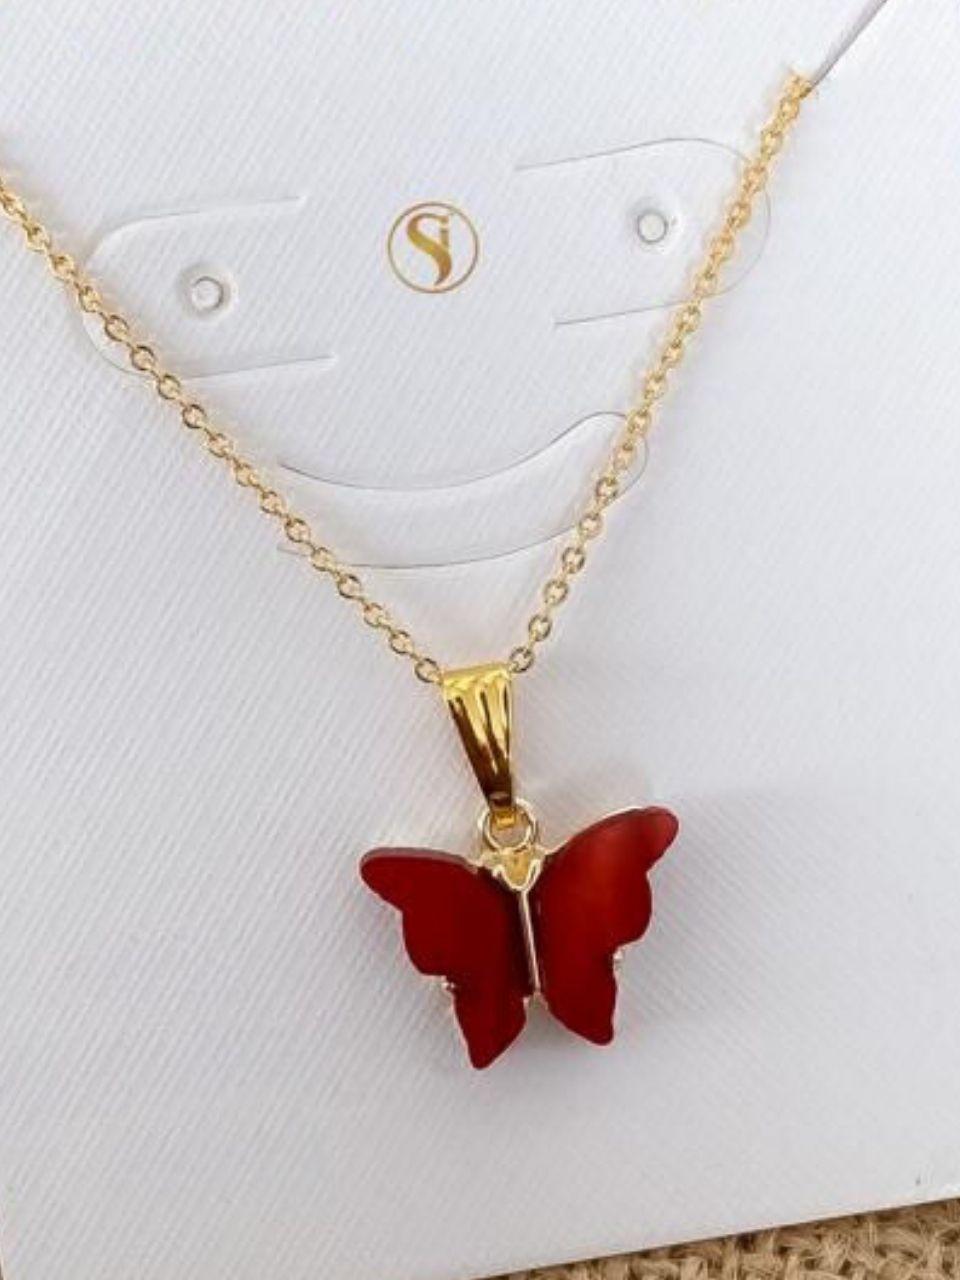 Shining Butterfly Pendant Necklace